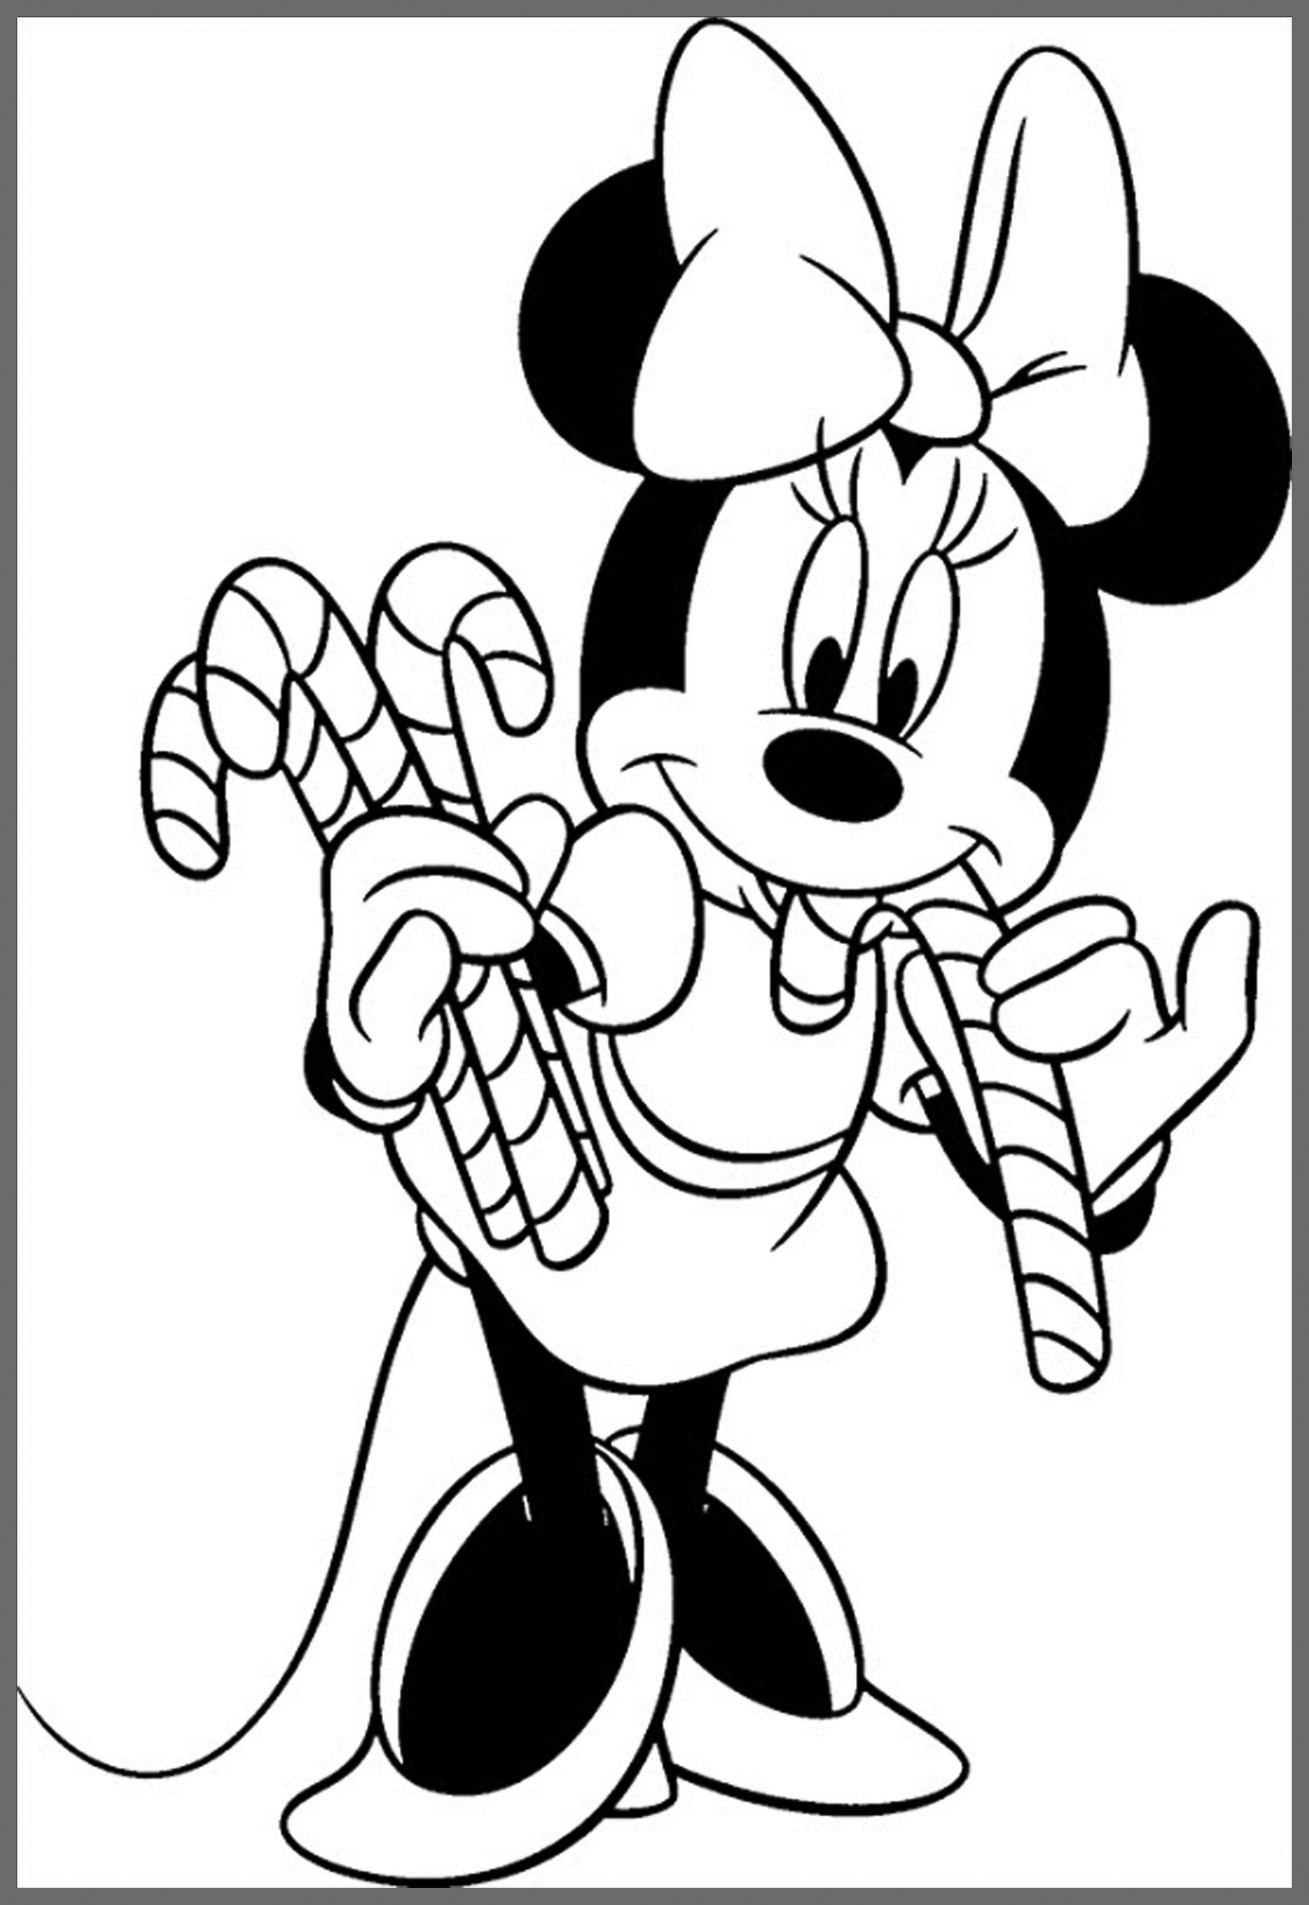 Christmas Coloring Pictures For Kids
 Mickey Mouse Christmas Coloring Pages Best Coloring